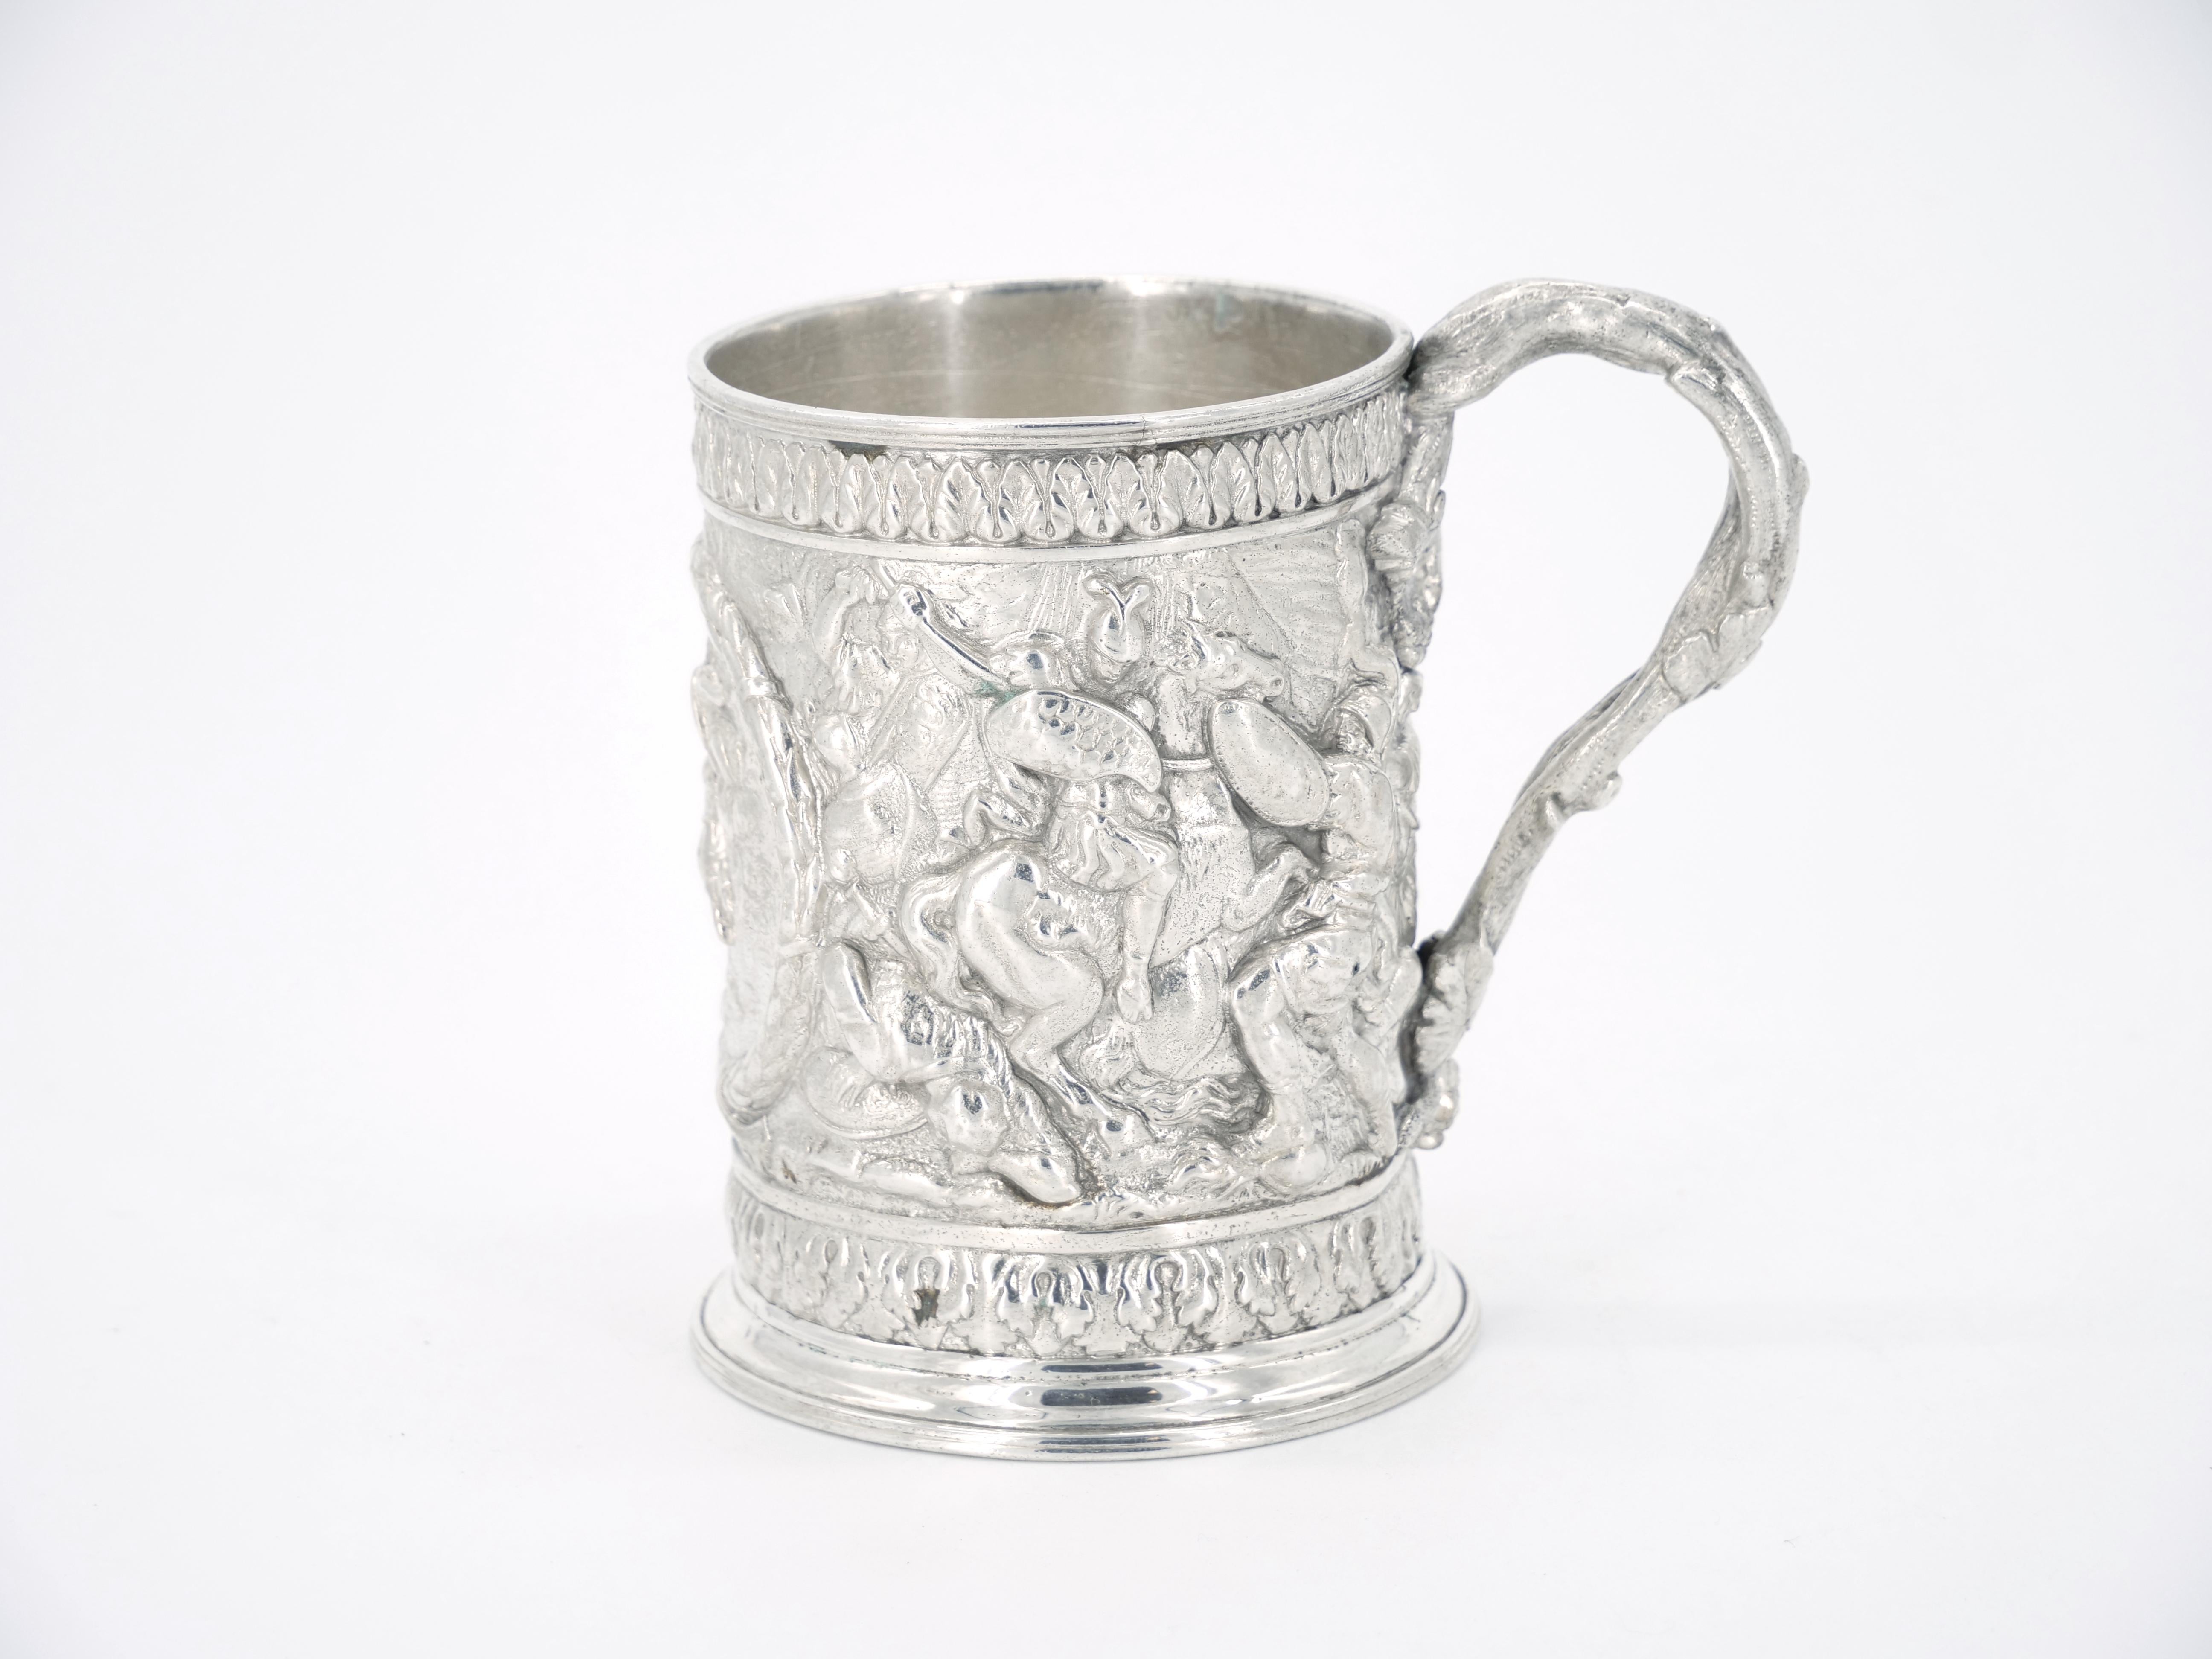 Nineteenth century Victorian period English silverplate mug with exceptional repousse designs in high relief, including central wreath depicting knights on horseback in battle with two additional scenes depicting knights battling on foot. Apparently